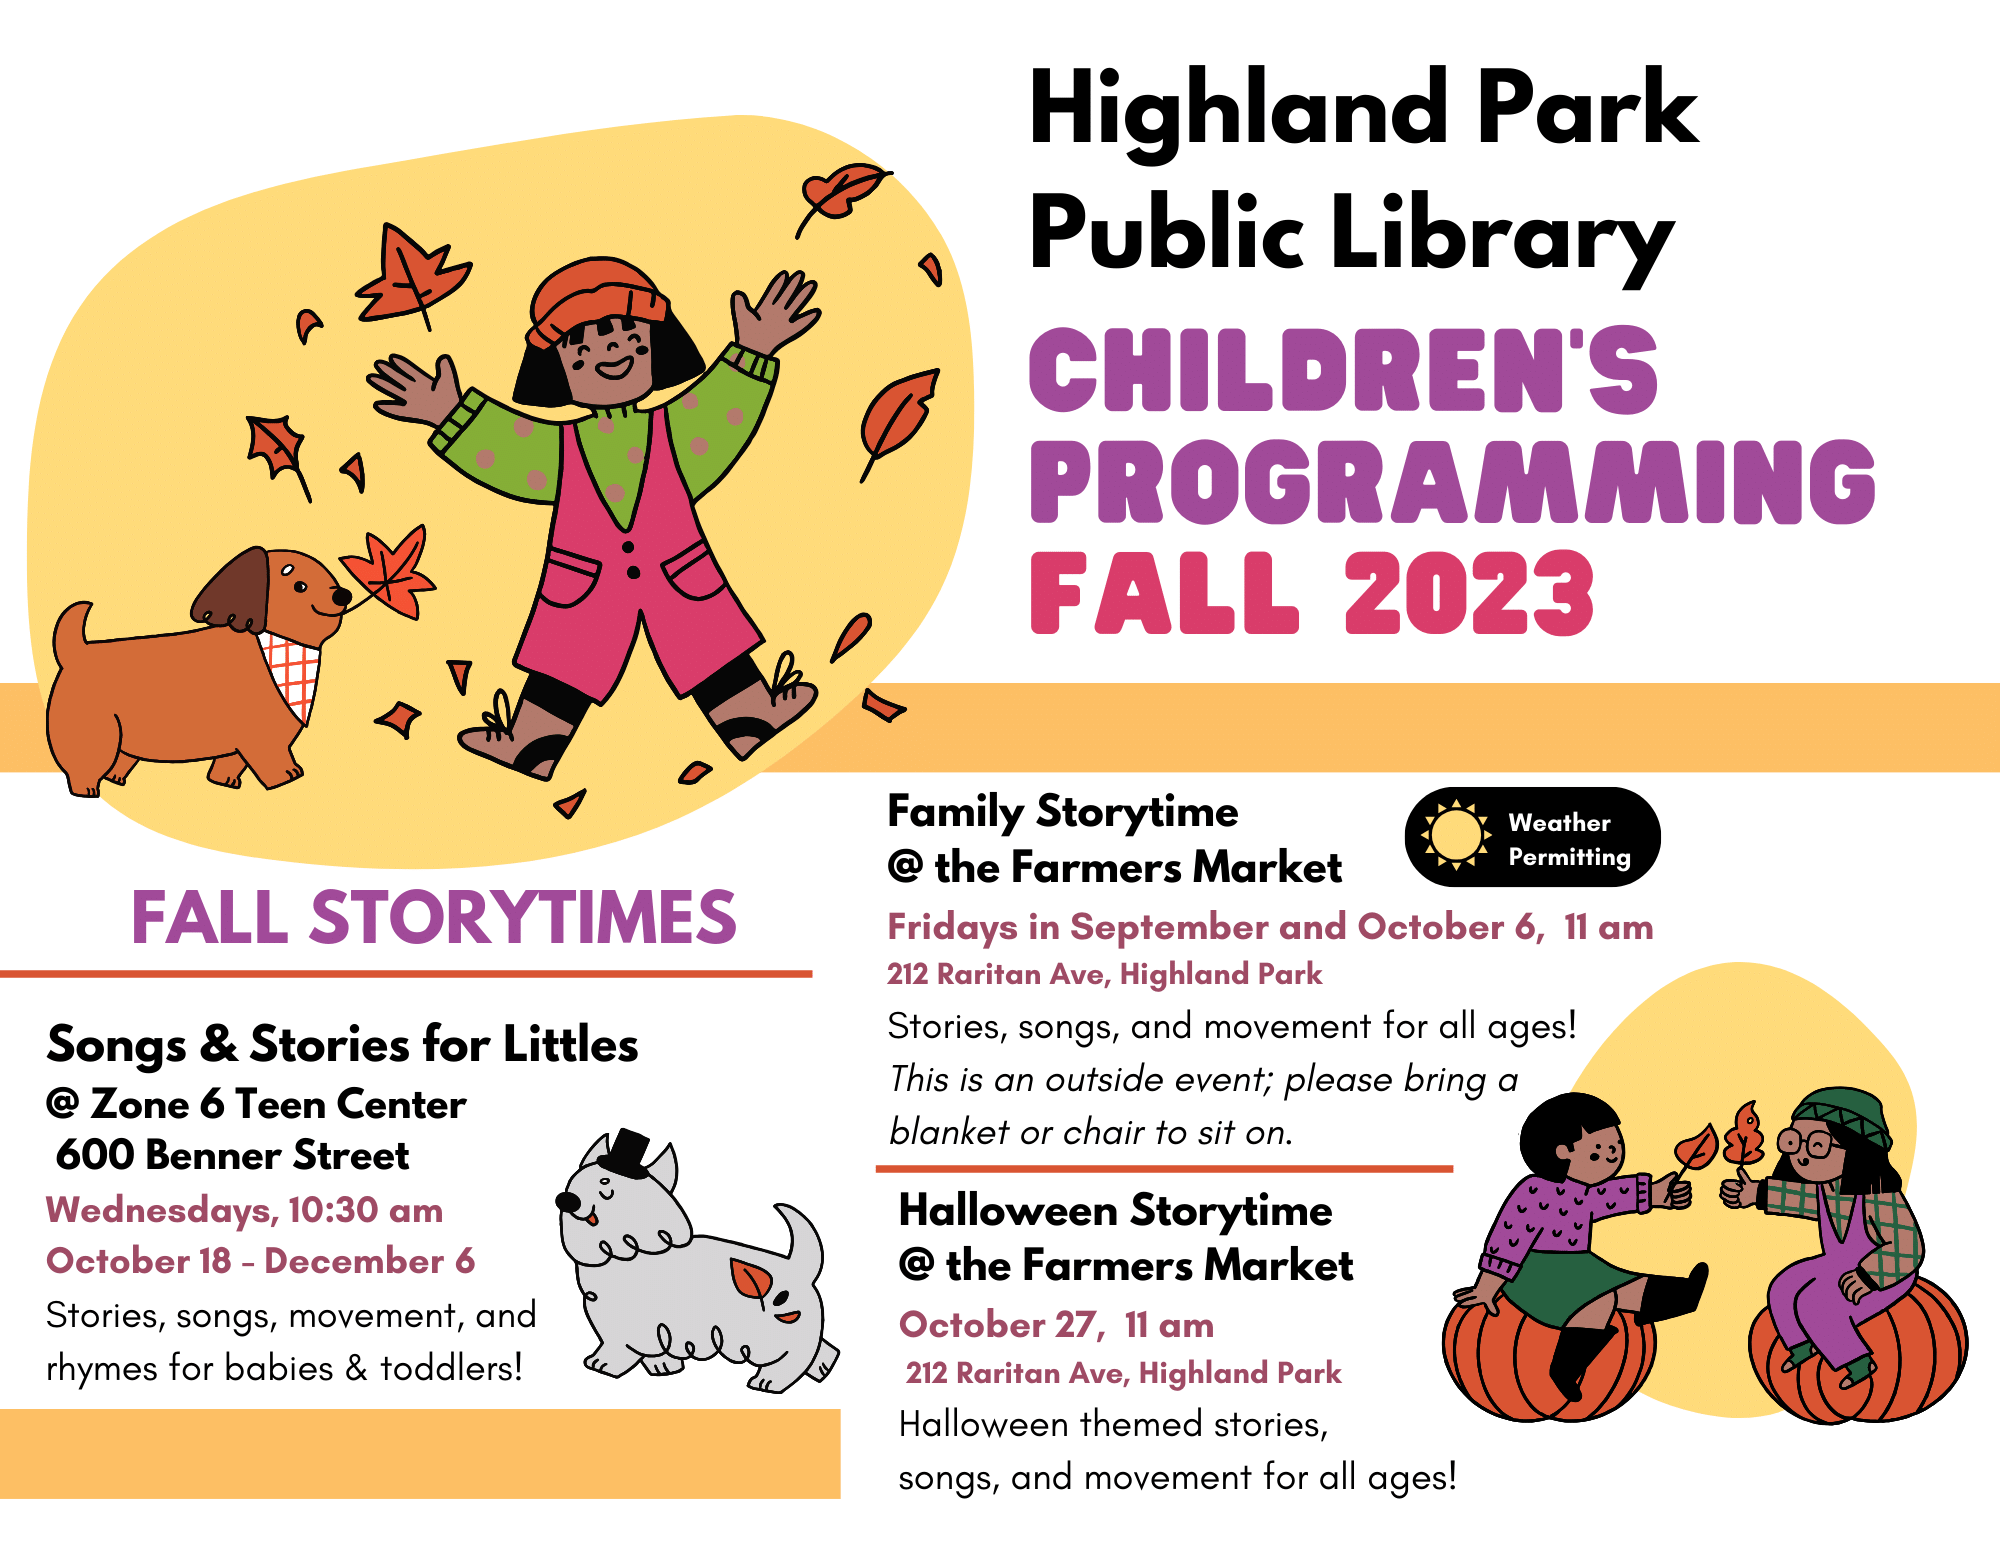 Highland Park Public Library Children's Programming Fall 2023
Songs & Stories for Littles 
@ Zone 6 Teen Center
 600 Benner Street 
Wednesdays, 10:30 am
October 18 - December 6
Stories, songs, movement, and 
rhymes for babies & toddlers!